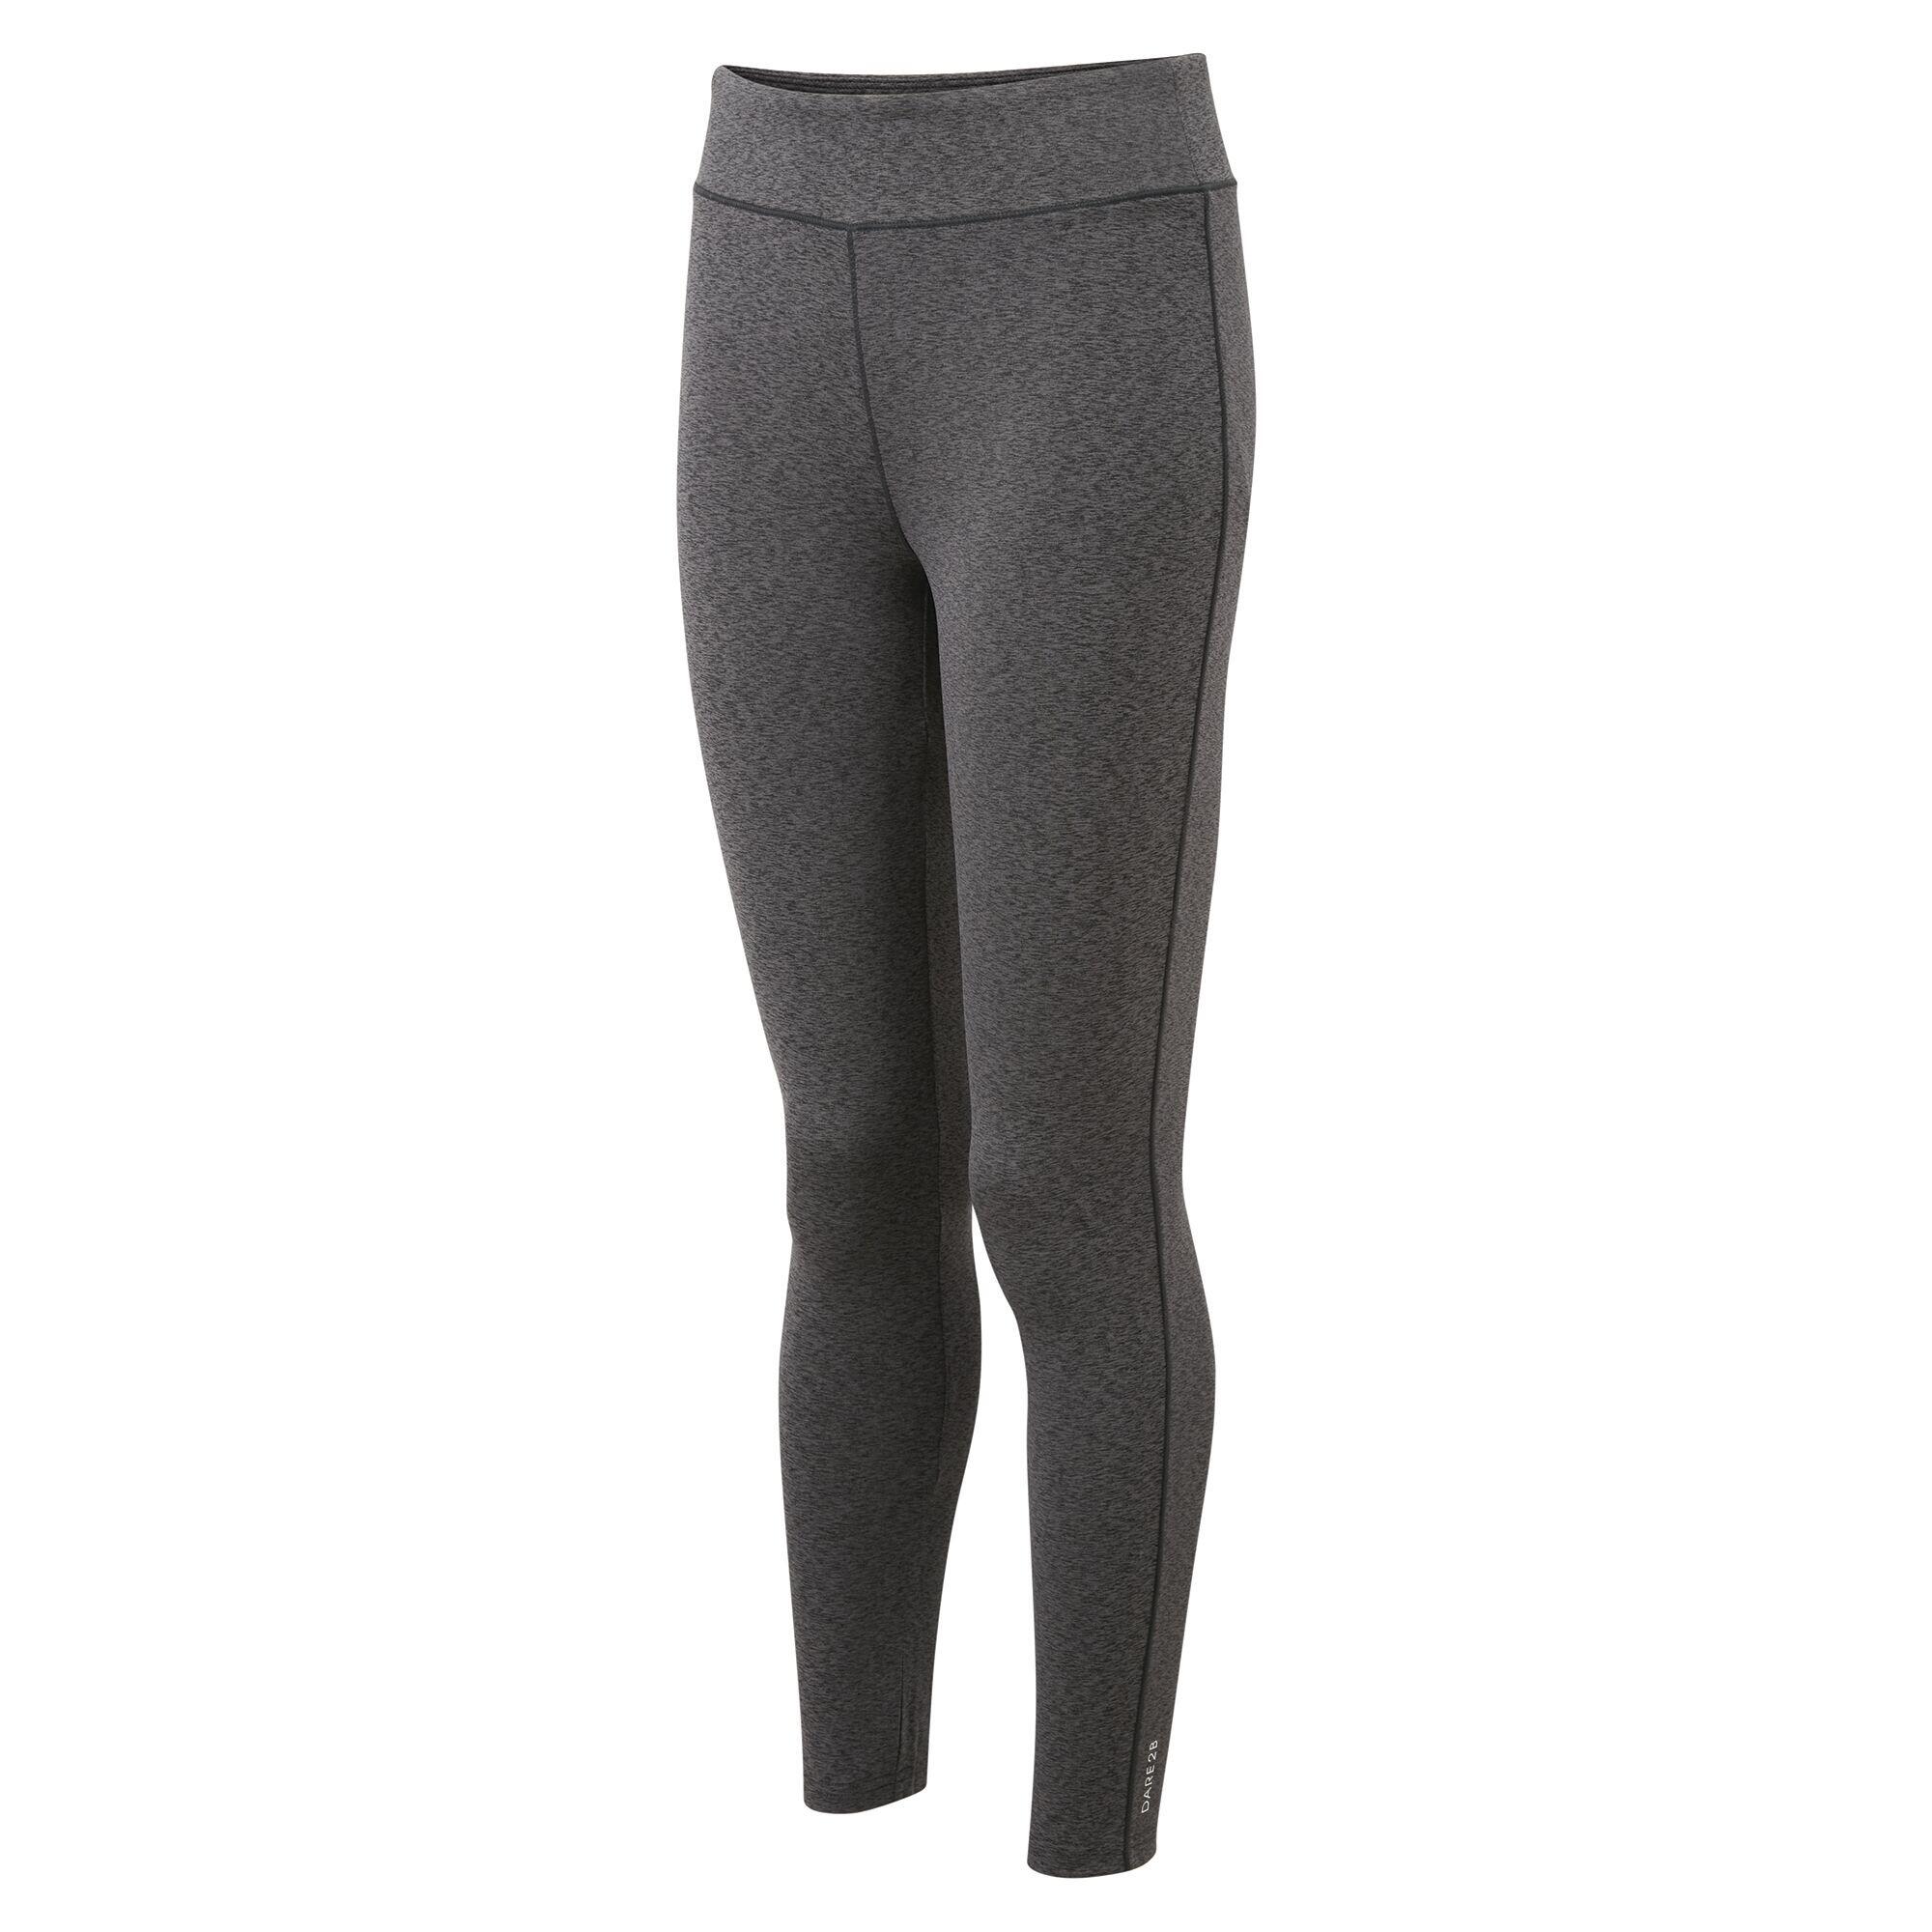 Womens/Ladies Influential Tight Lightweight Gym Leggings (Charcoal Grey) 3/4